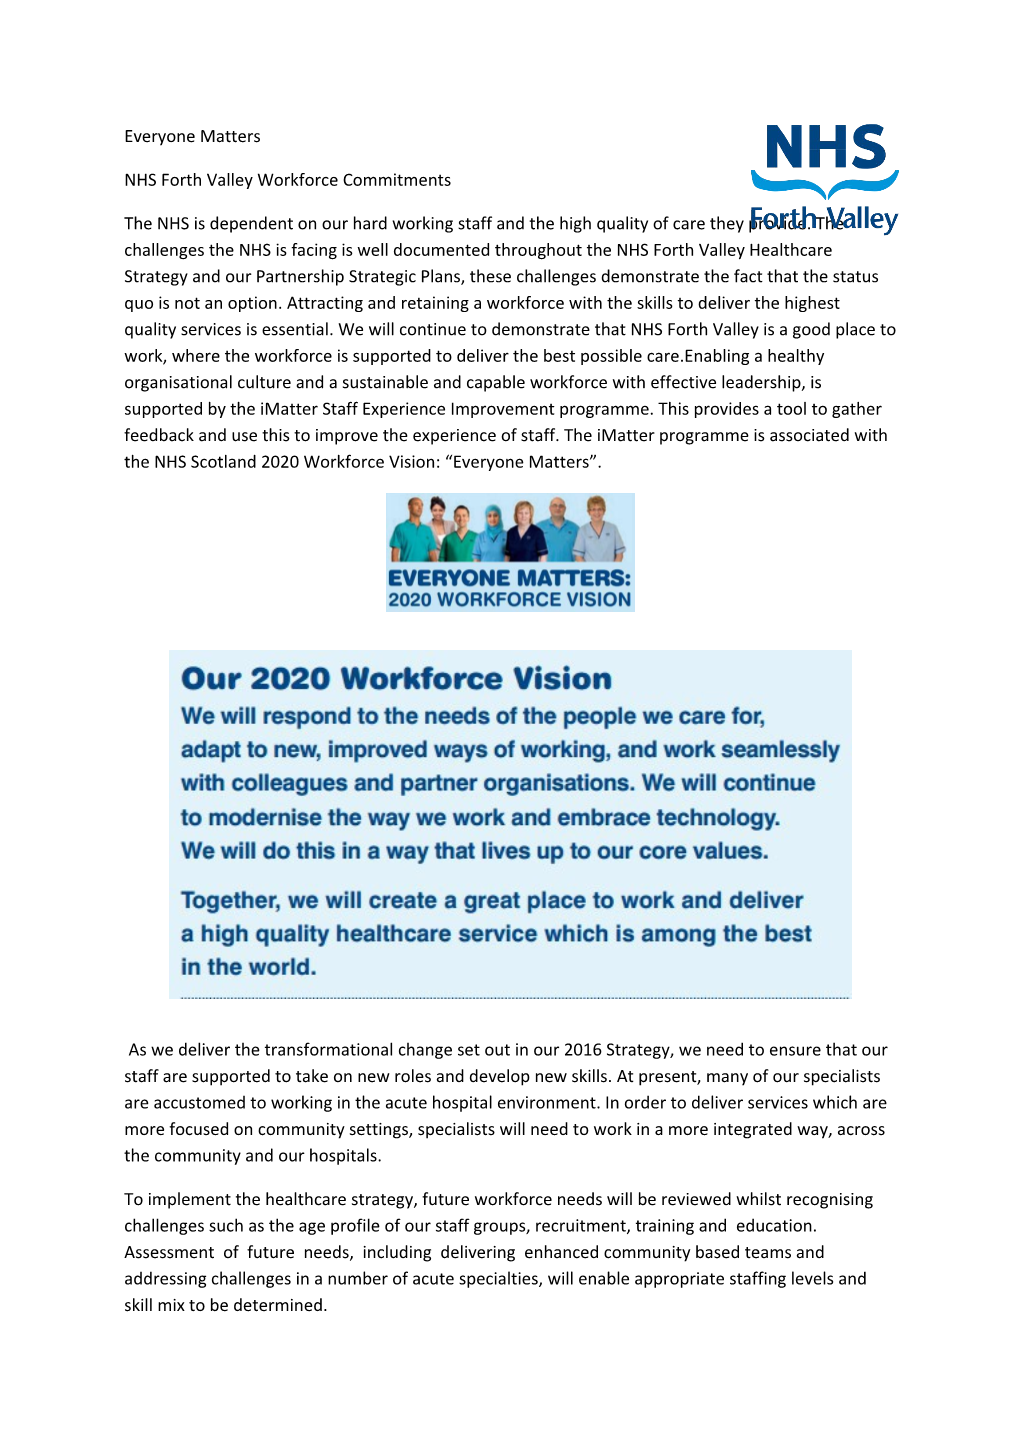 NHS Forth Valley Workforce Commitments